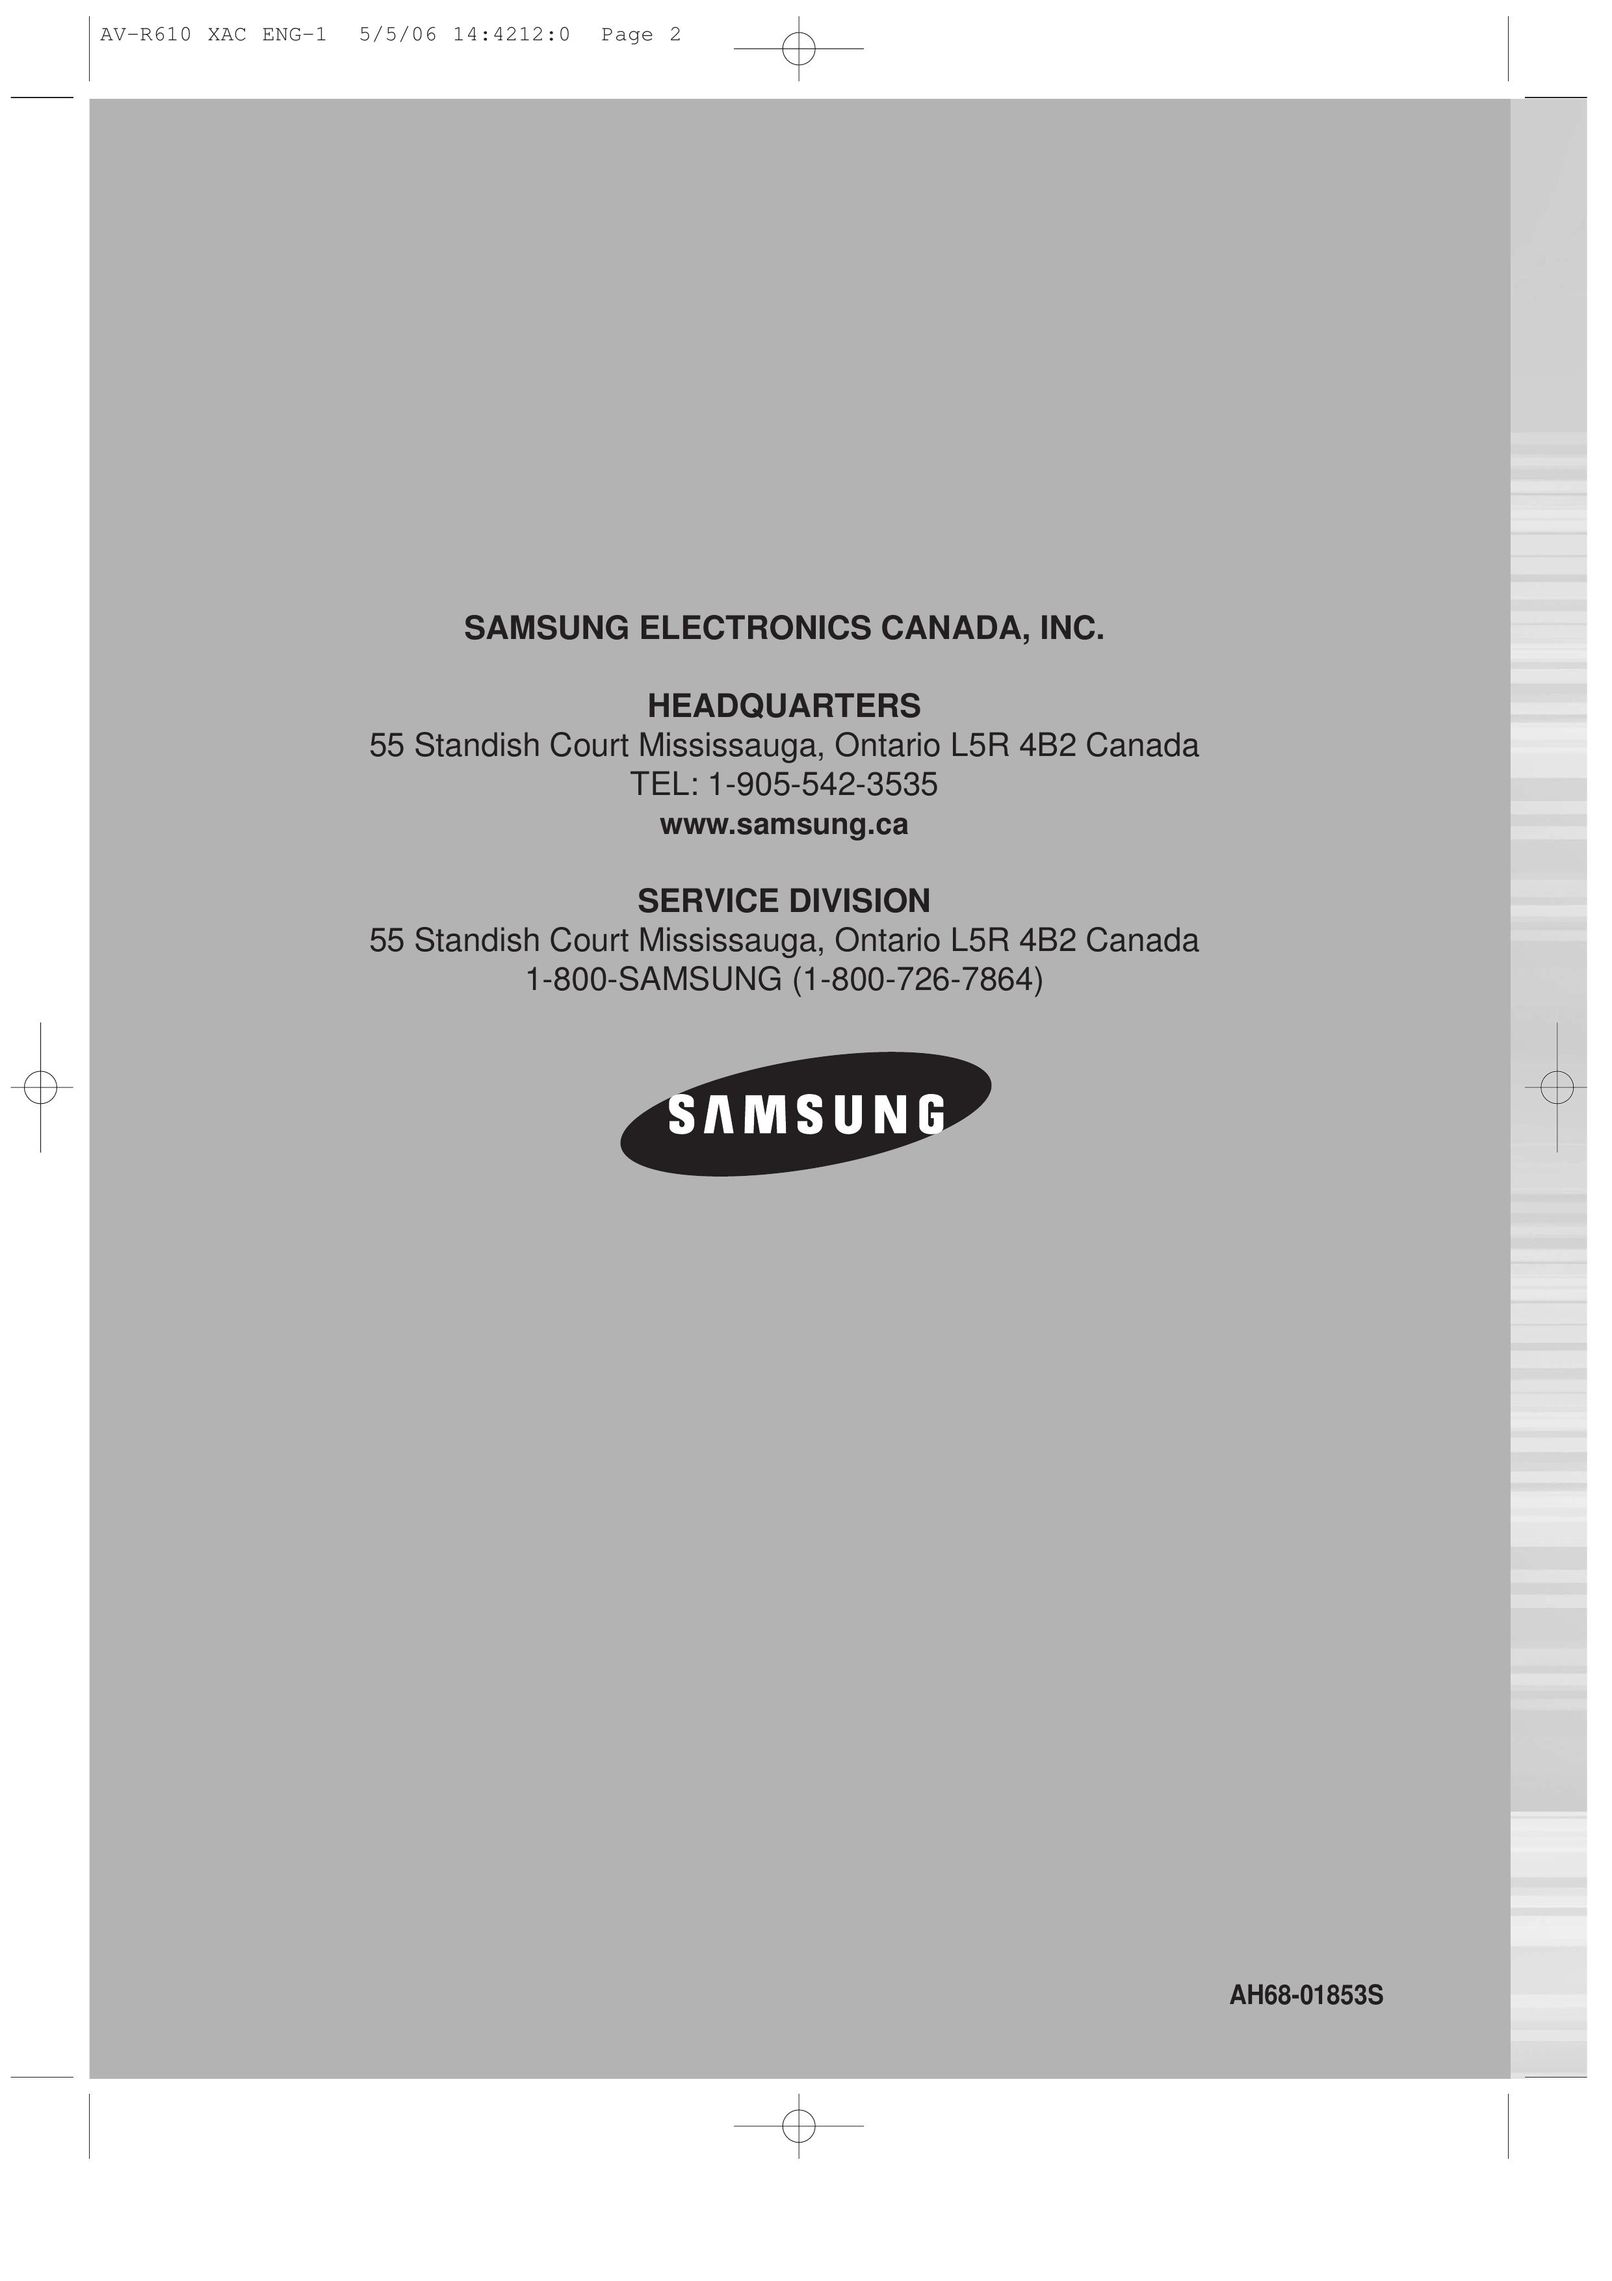 Samsung 20060510083254531 Stereo Receiver User Manual